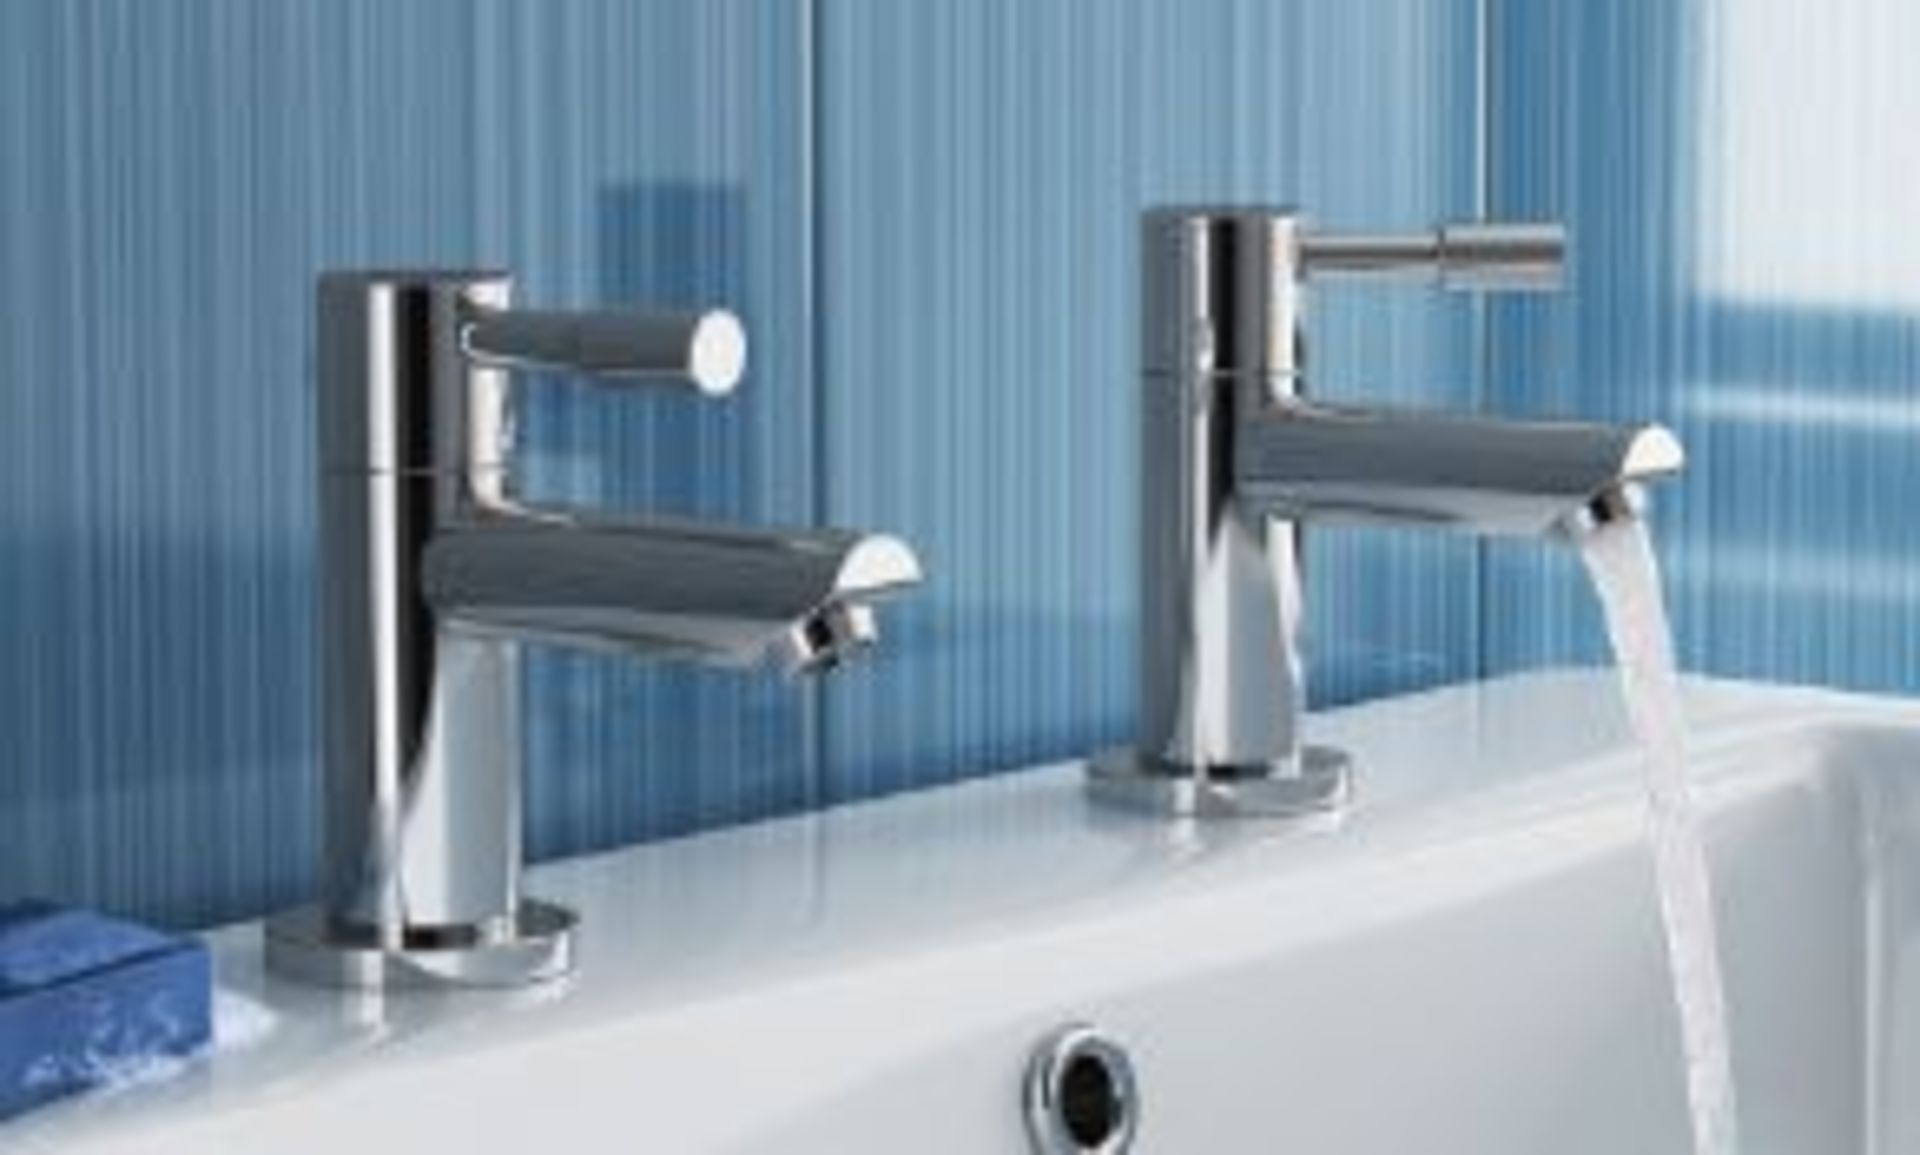 New & Boxed Gladstone Taps. Tb2013.Chrome Plated Solid Brass Mirror Finish Simple In...